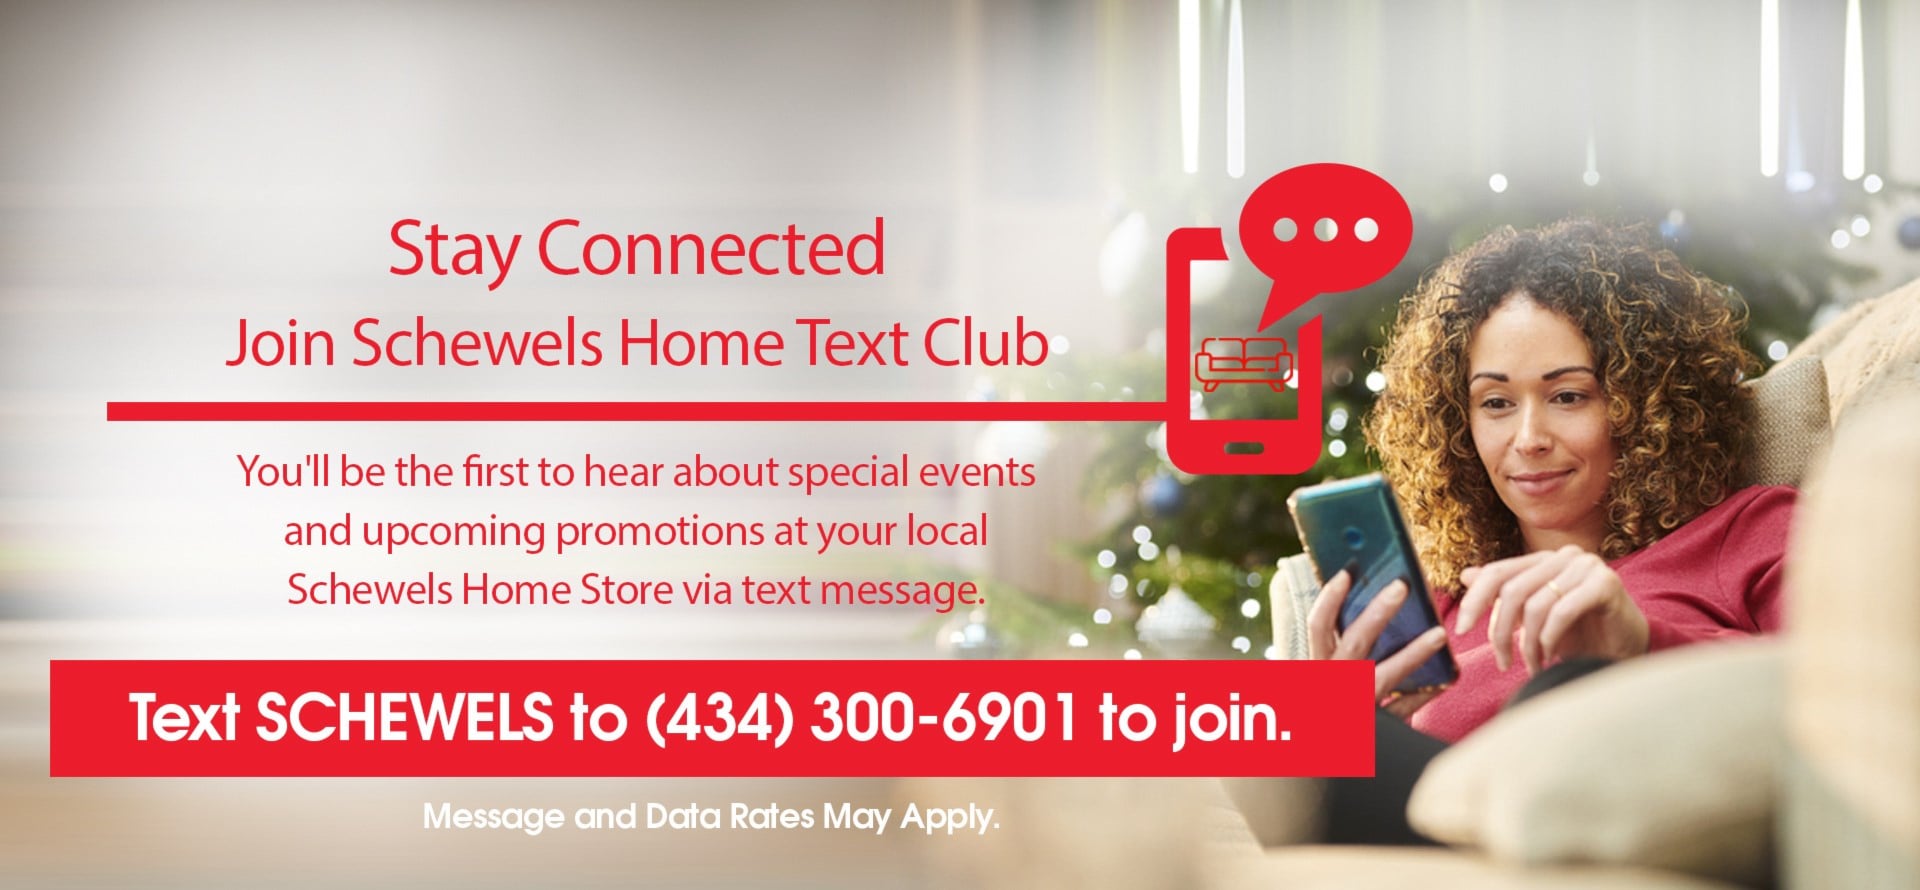 Stay Connected. Join Schewels Home Text Club | You'll be the first to hear about special events and upcoming promotions at your local Schewels Home Store via text message | Text SCHEWELS to 434 300 6901 to join. | Message and Data Rates May Apply.